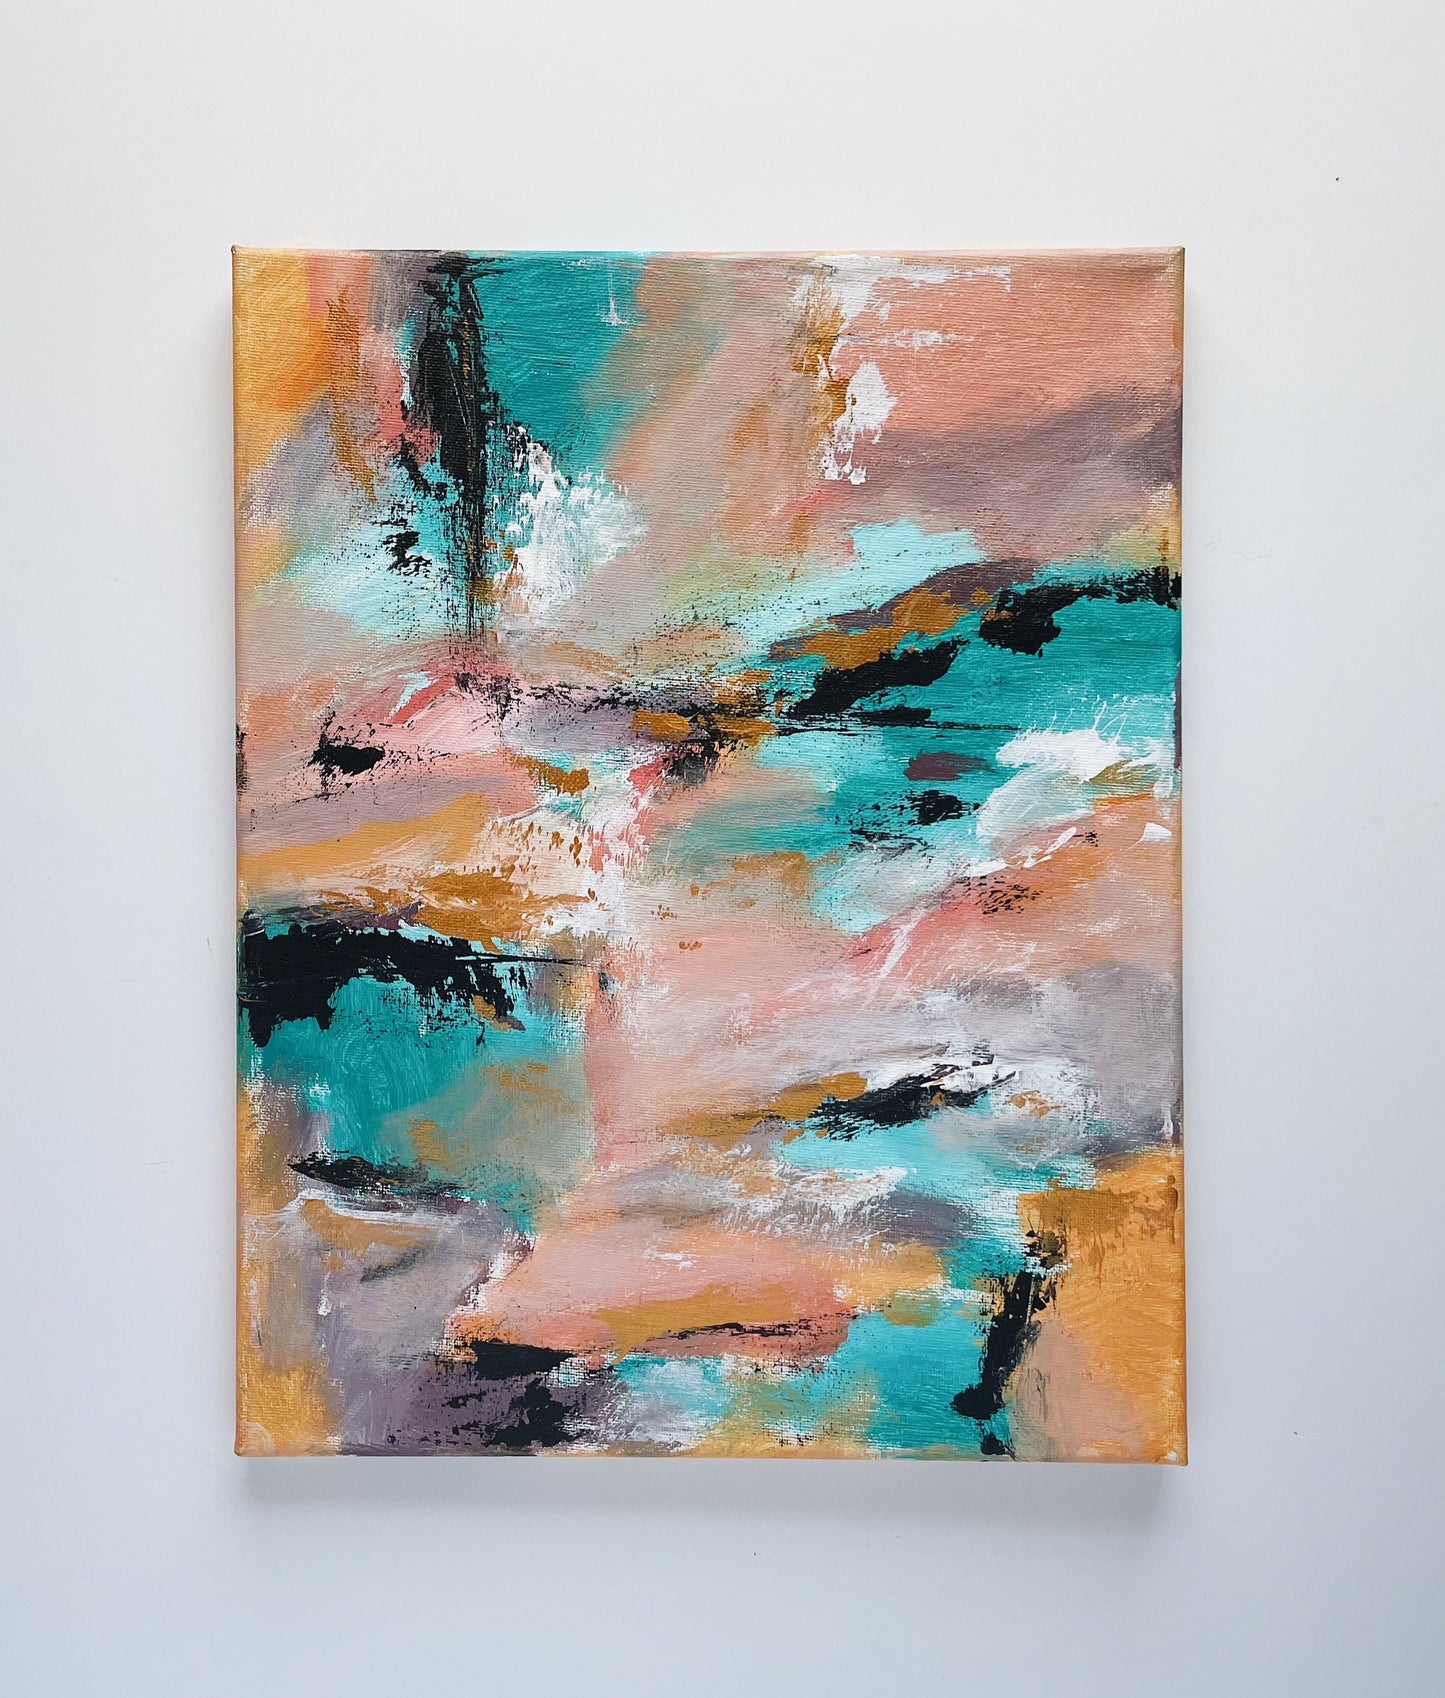 Abstract Painting Class Thursday, April 22 @ 7pm